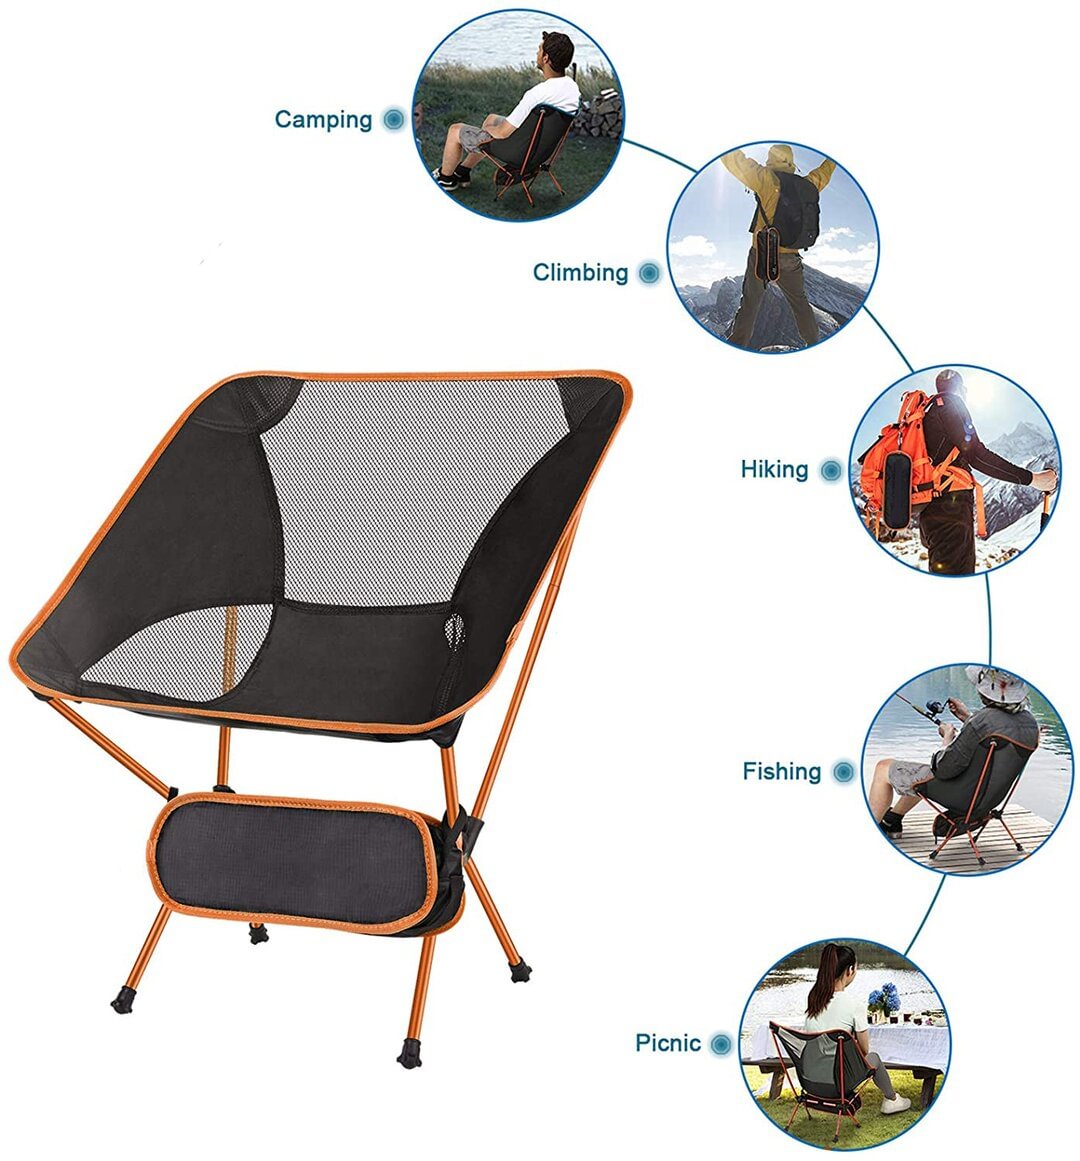 Portable Camping Chair Beach Chair - Compact Ultralight Folding Backpacking Chairs, Small Collapsible Foldable Packable Lightweight Backpack Chair in a Bag for Outdoor, Camp, Picnic, Hiking、、sdecorshop